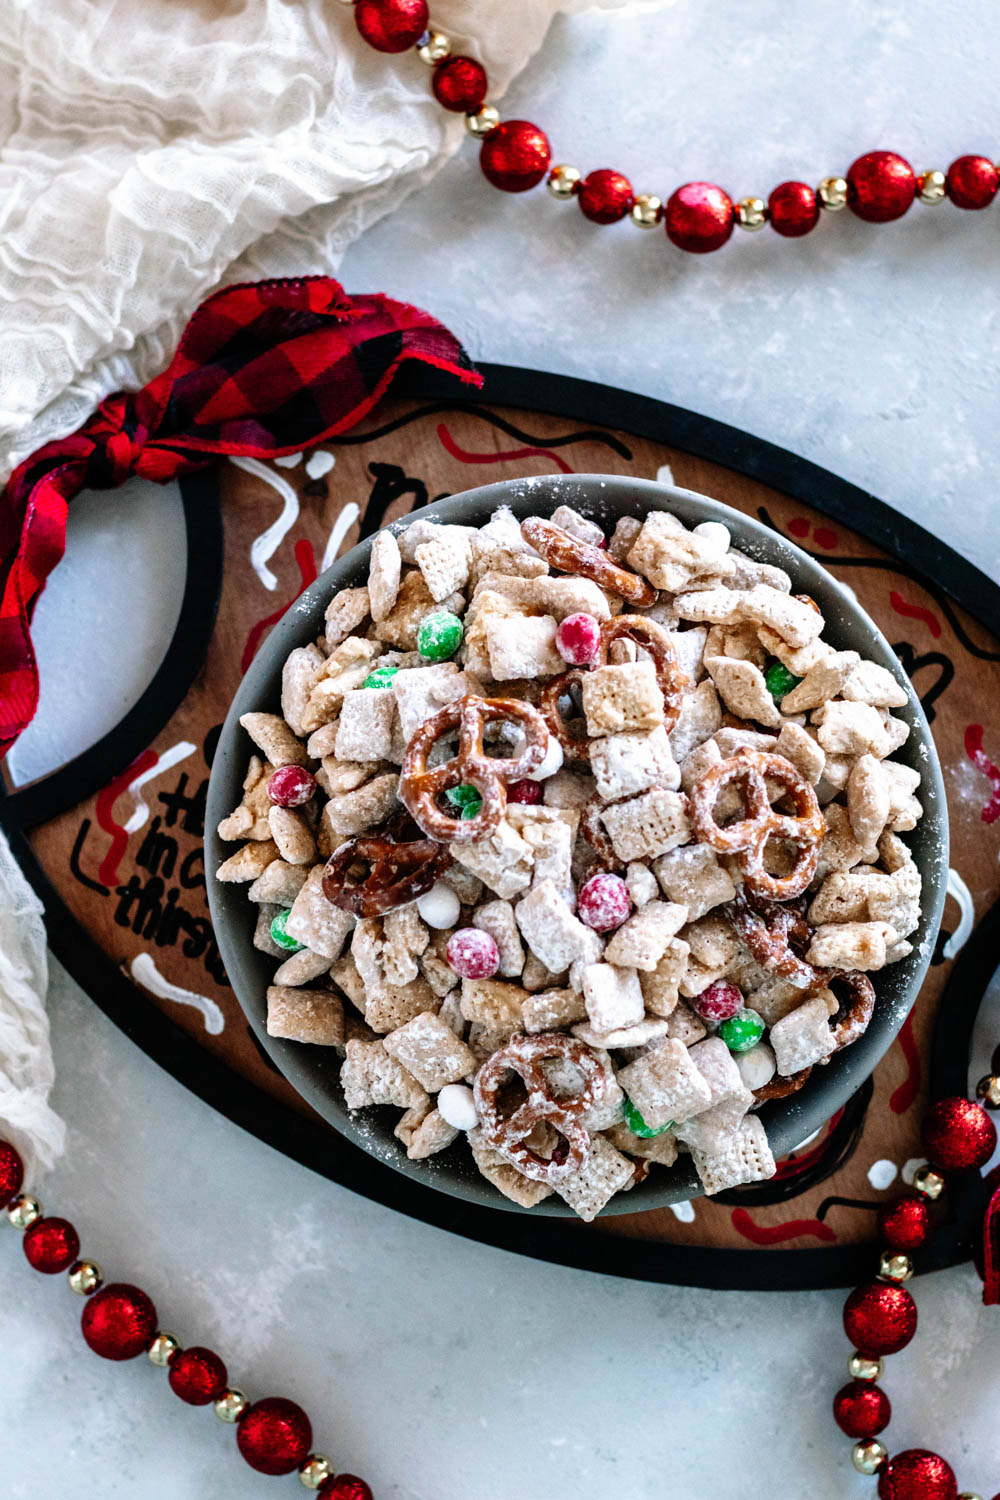 Overhead view of the Christmas Muddy Buddy Mix in a grey bowl on a "Cookies for Santa" tray. This is one serving suggestion